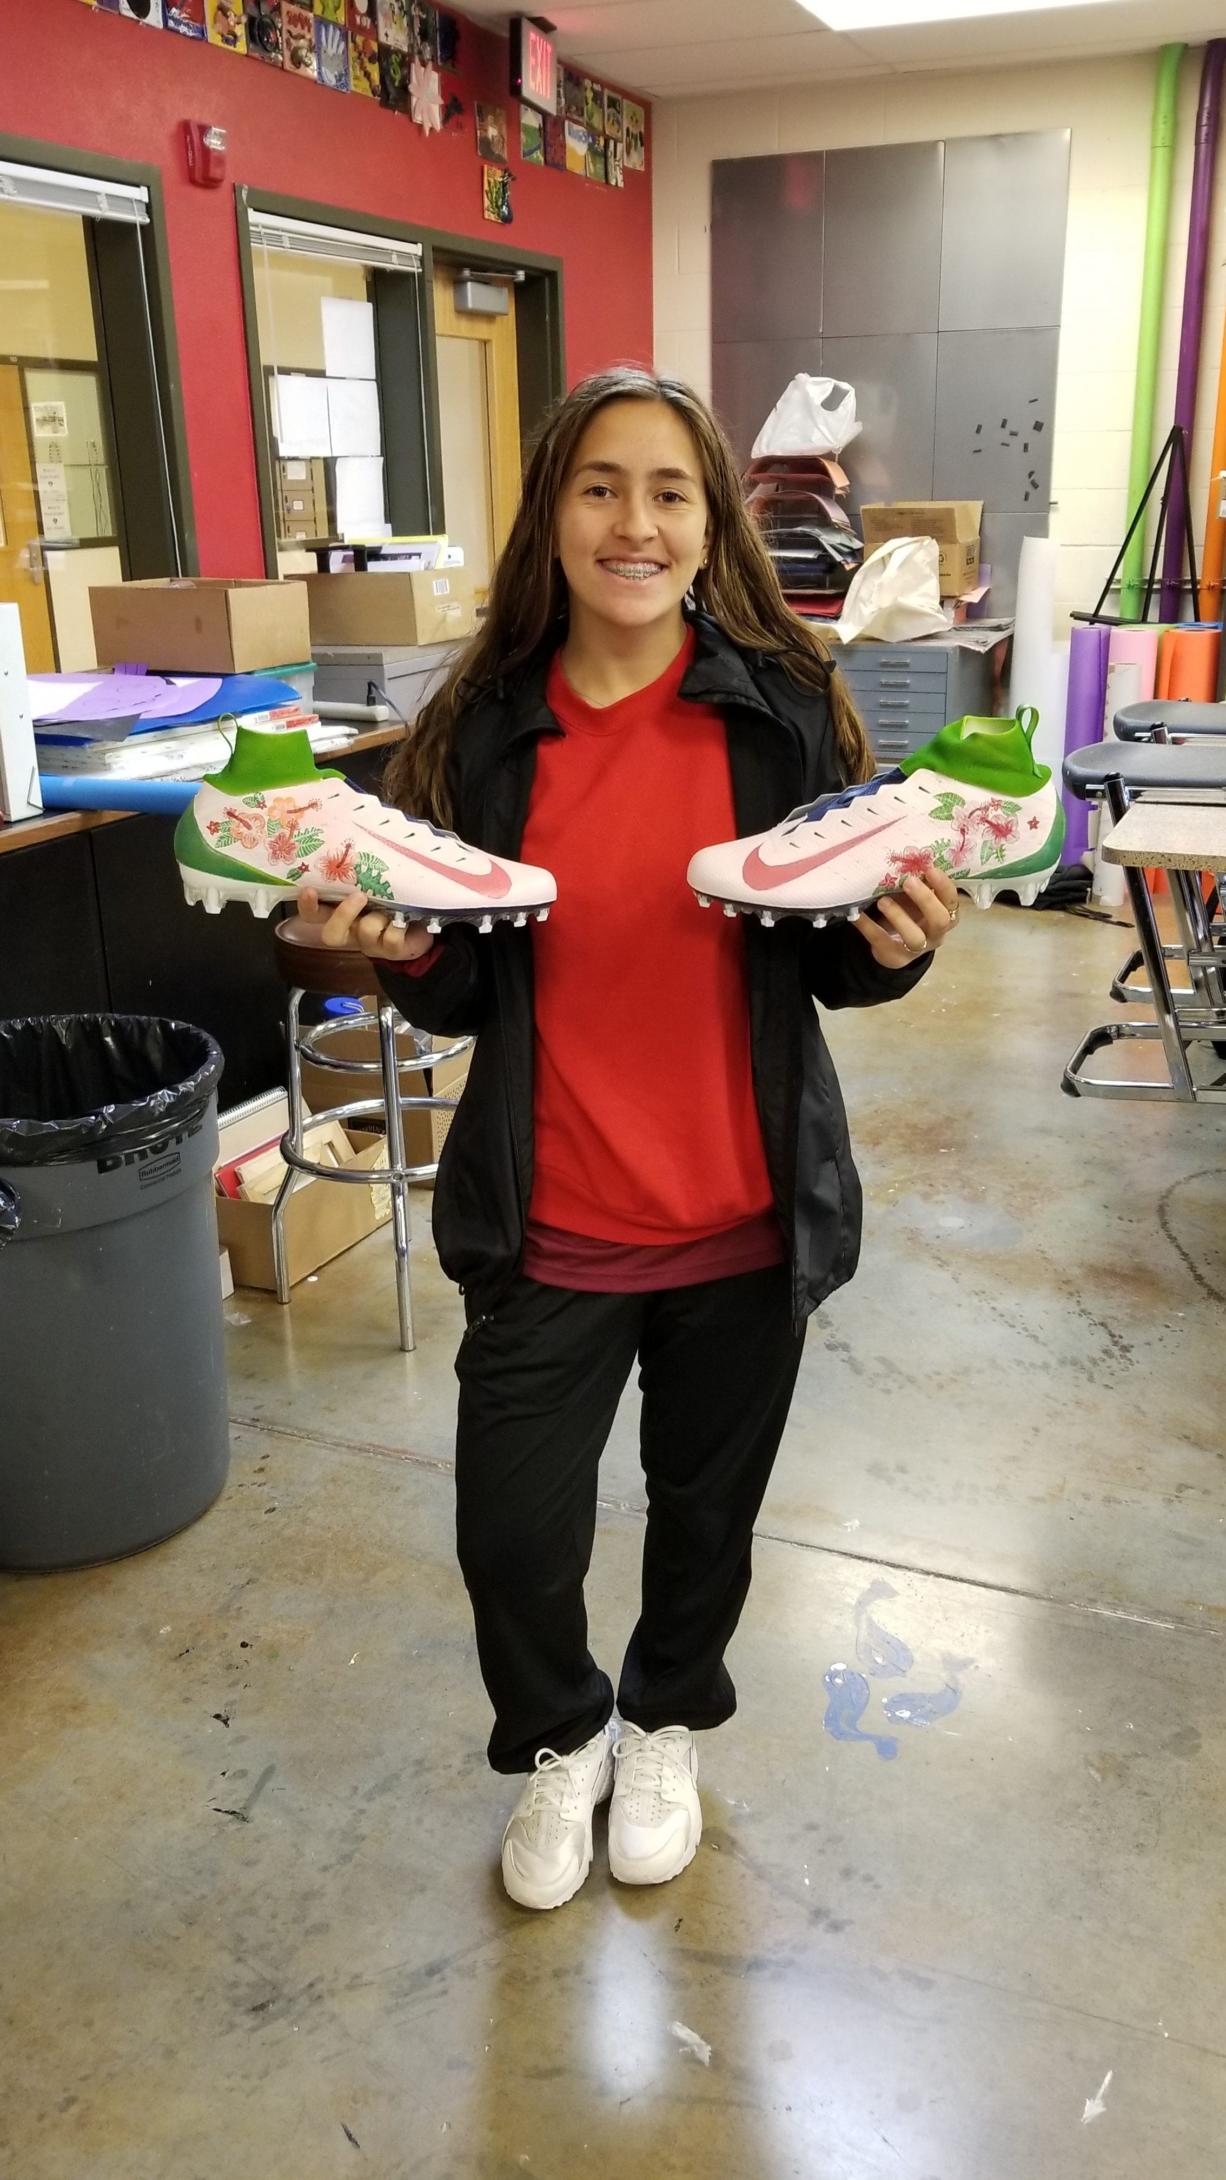 King's Way Christian freshman Olive Mohammadi poses with her personally designed cleats before sending them off to Nashville, Tenn. to be worn by NFL quarterback Marcus Mariota during a Thursday Night Football game as part of an NFL charity event.